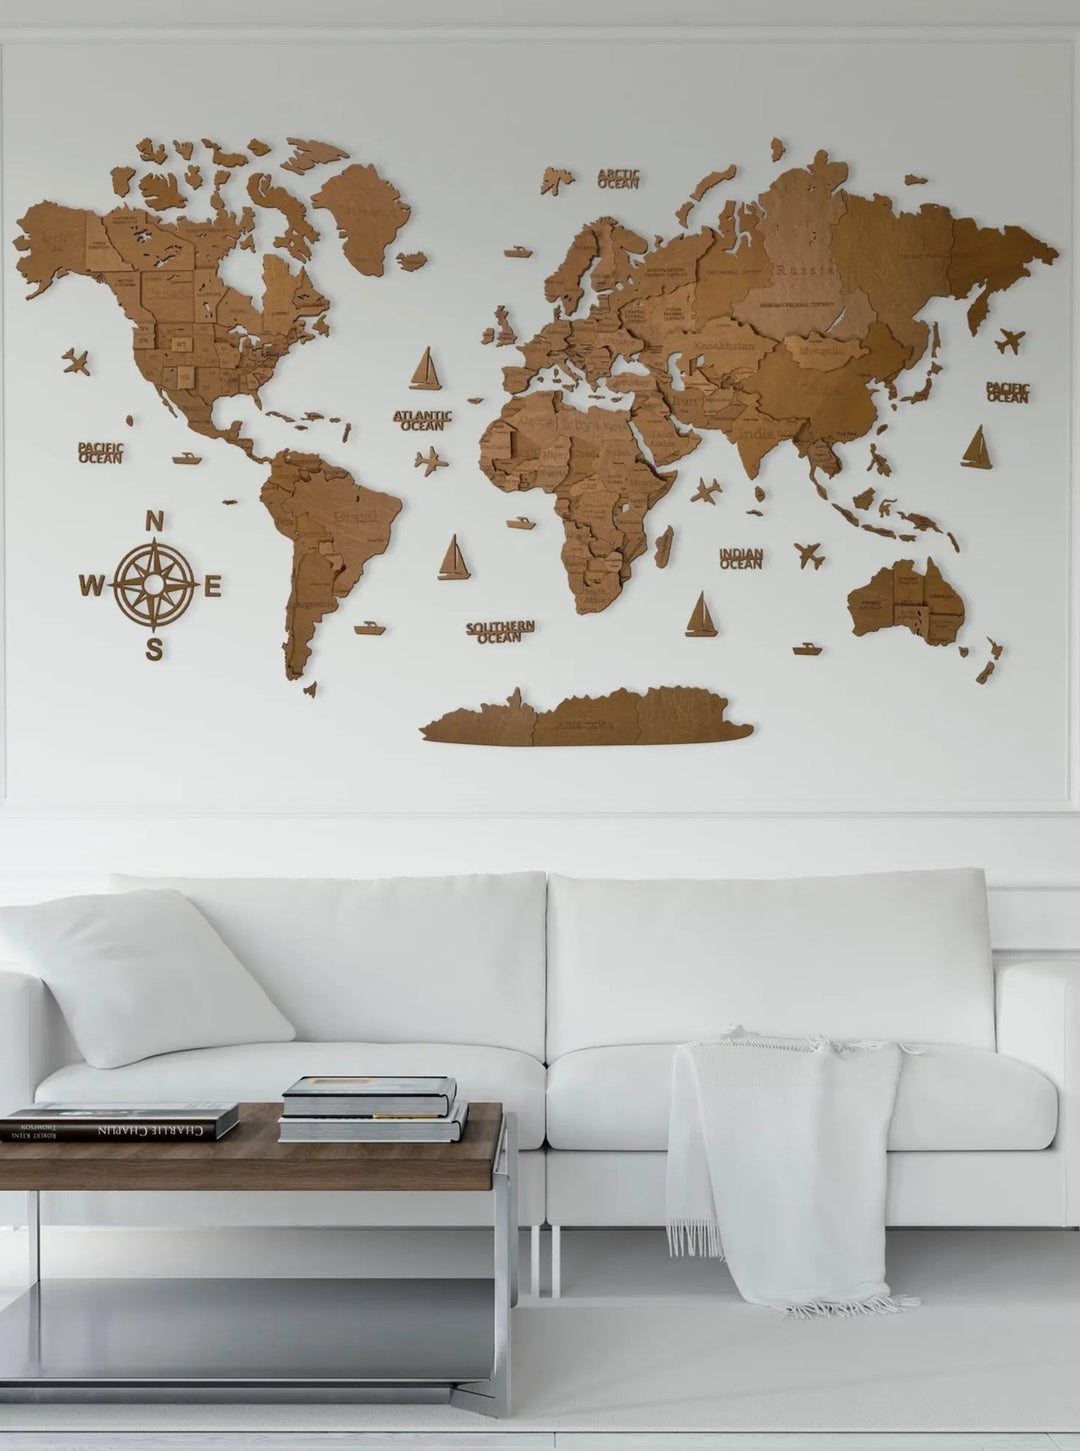 3D WOODEN WALL MAP COLOR “CALIFORNIA” – WoodLeo